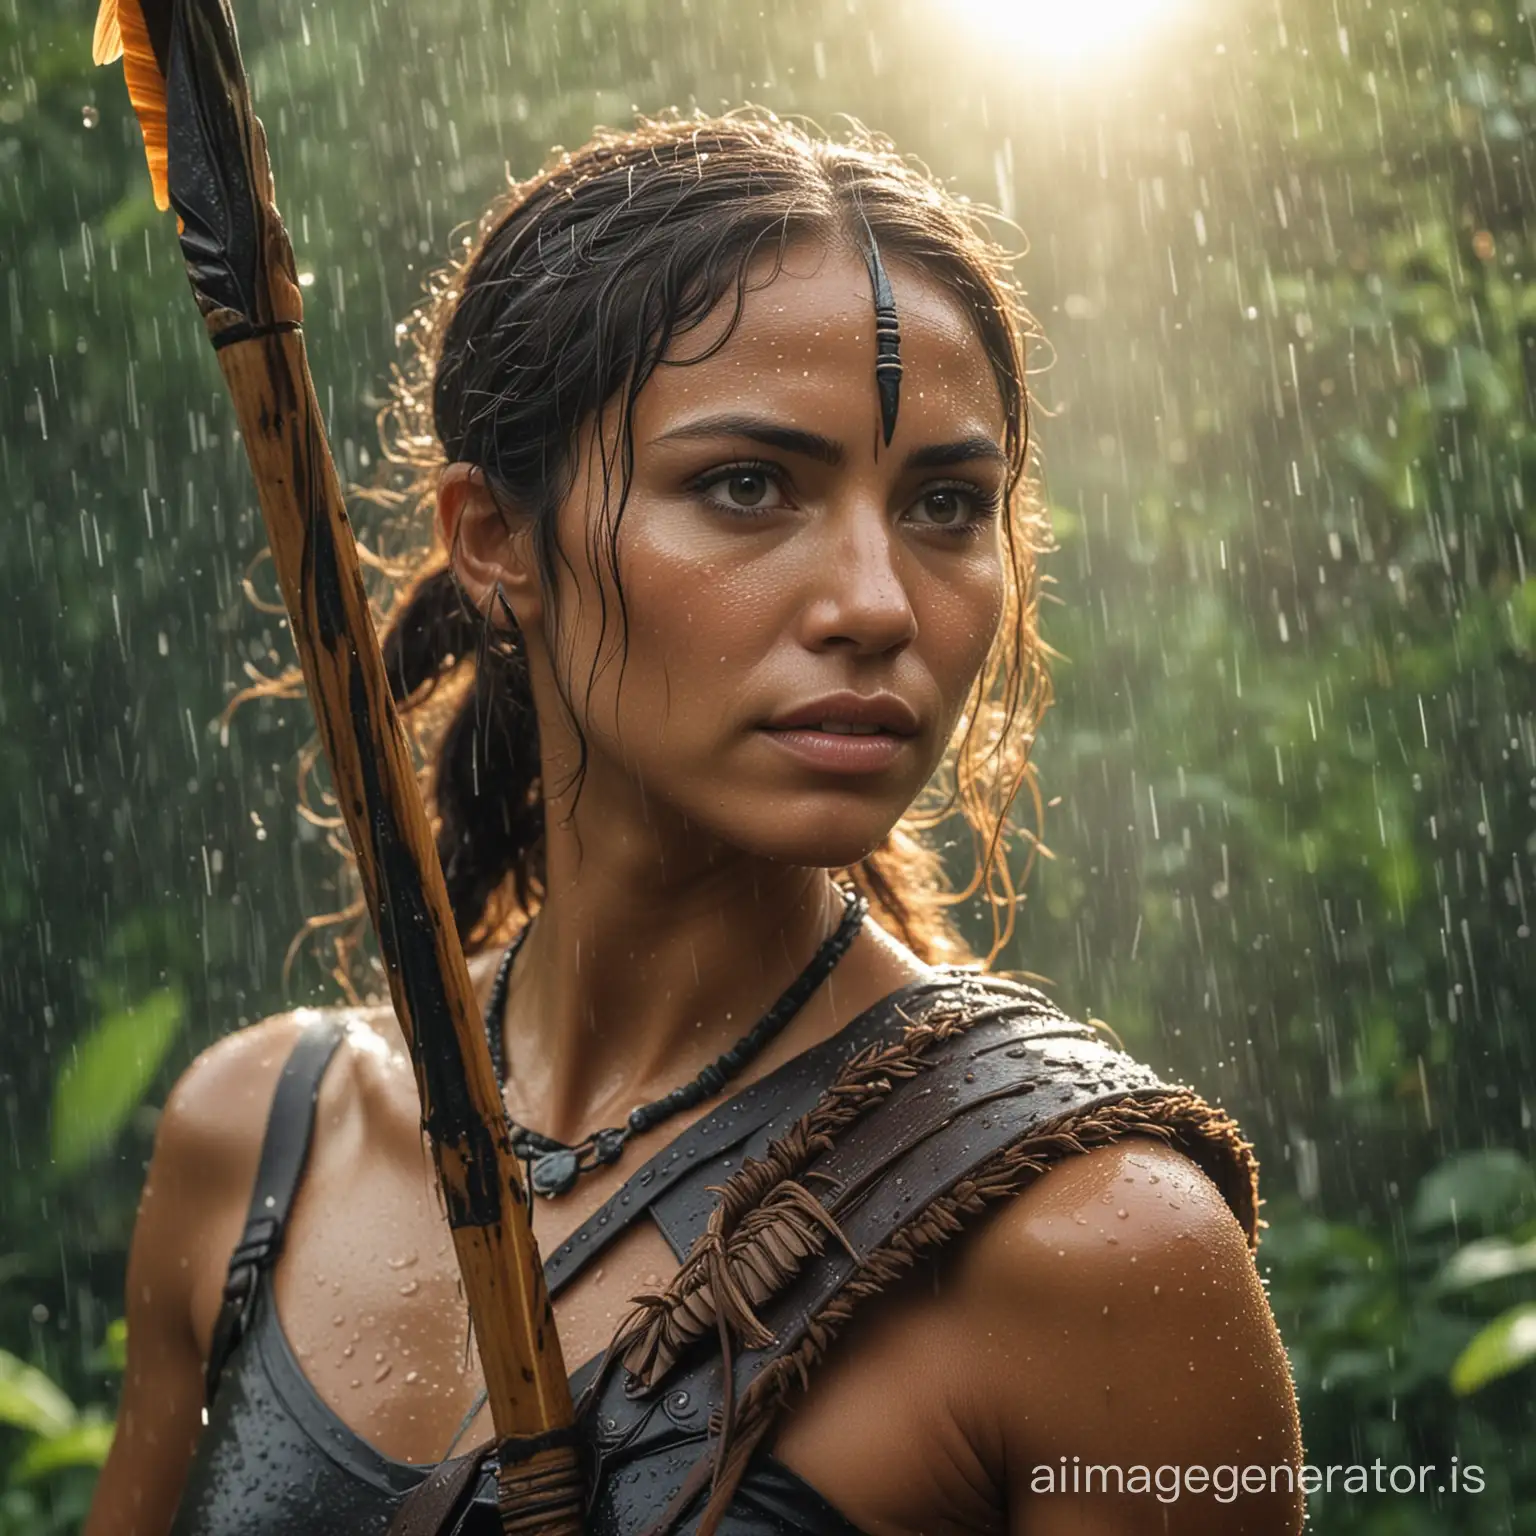 A close-up of a Amazon woman warrior holding a spear in lush rain and sunshine